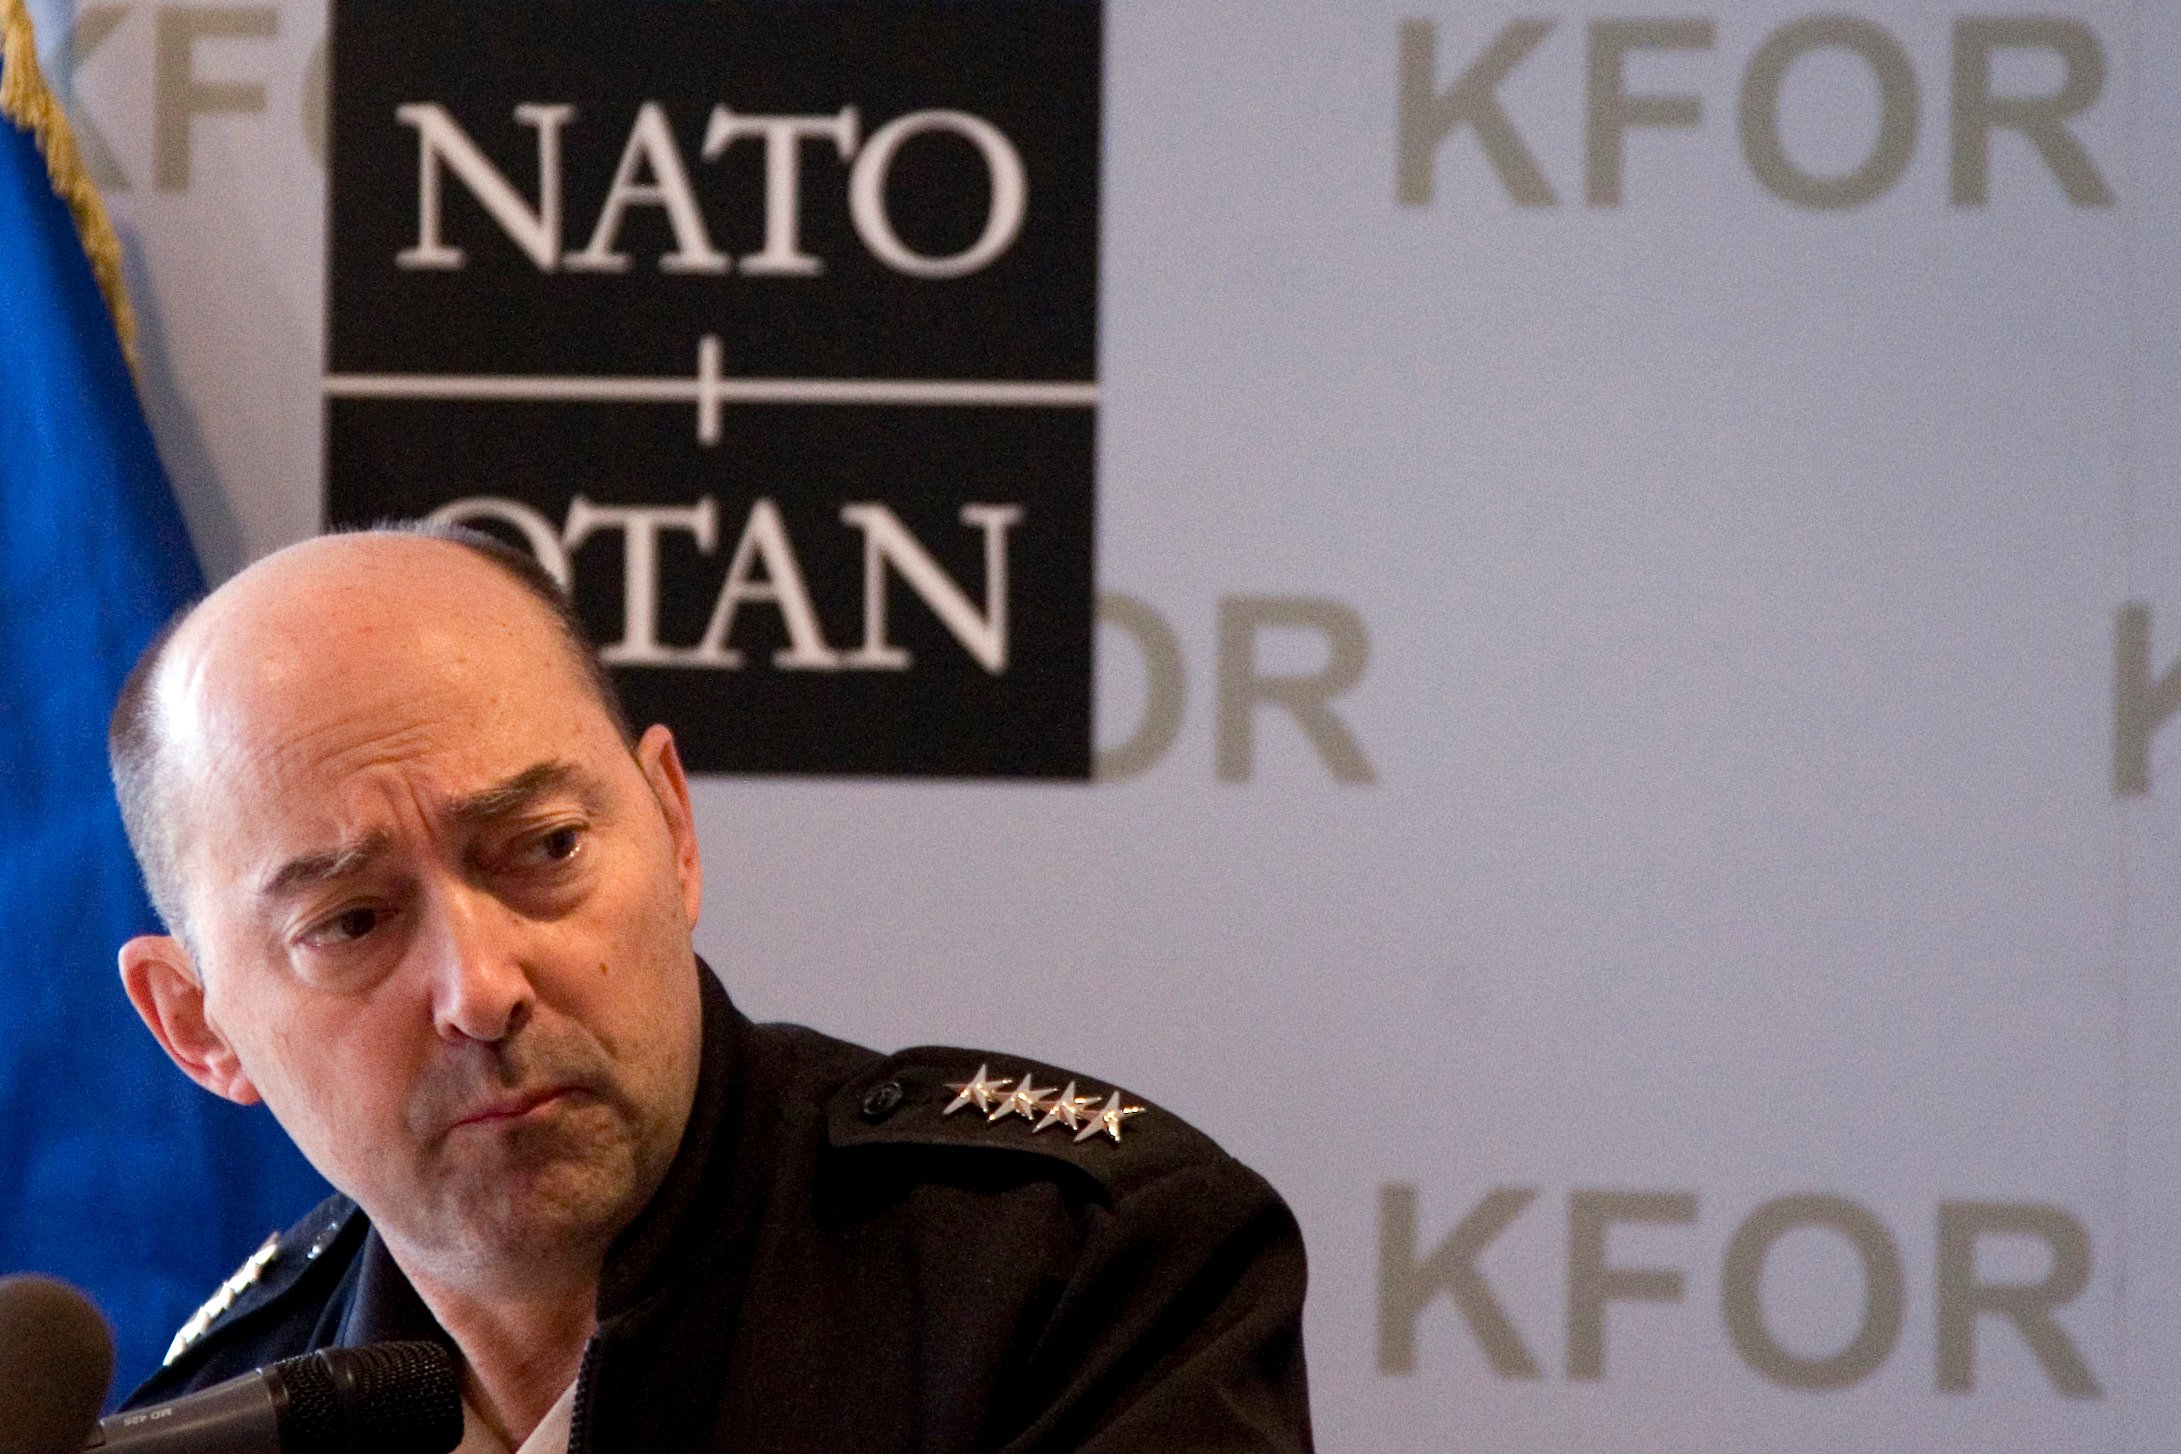 Then-Nato Supreme Allied Commander Europe US Admiral James Stavridis at a press conference in 2009. Photo: AFP